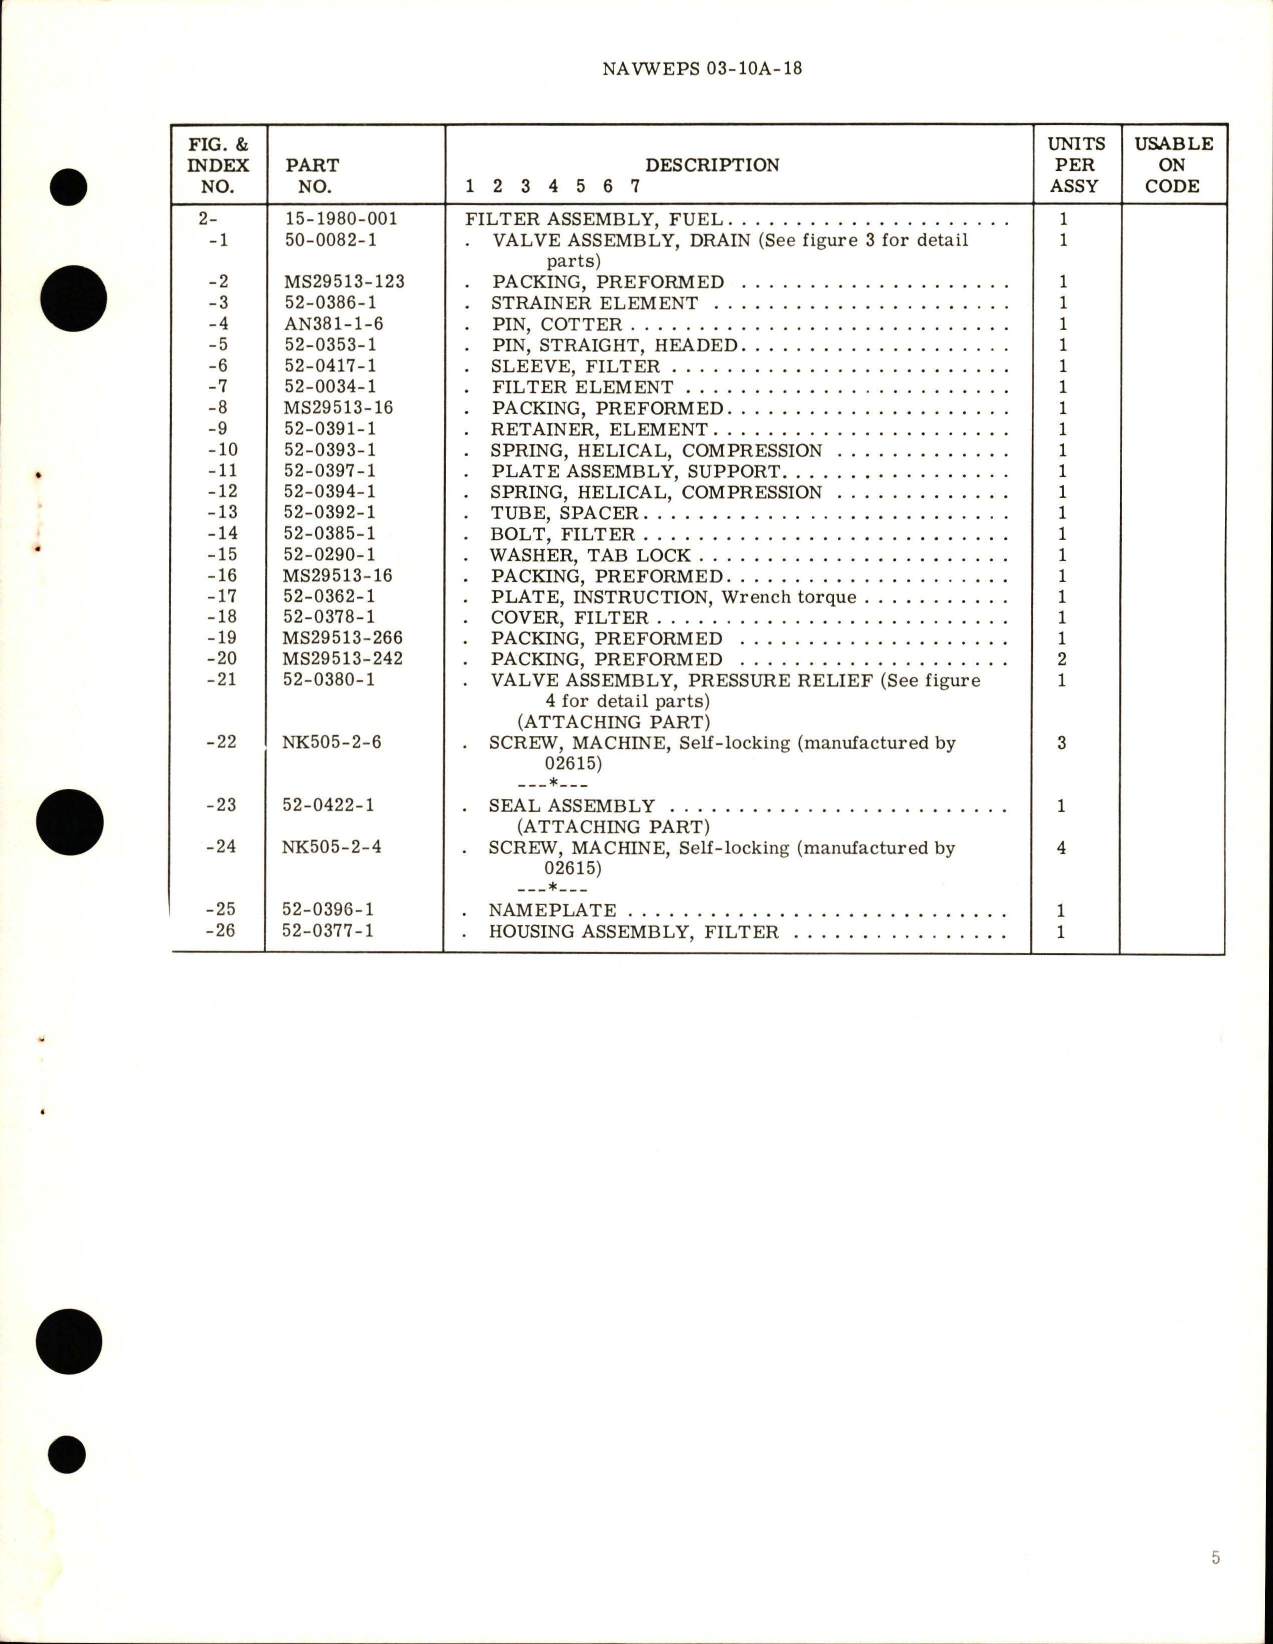 Sample page 5 from AirCorps Library document: Overhaul Instructions with Parts Breakdown for Fuel Filter Assembly - Part 52-1980-001